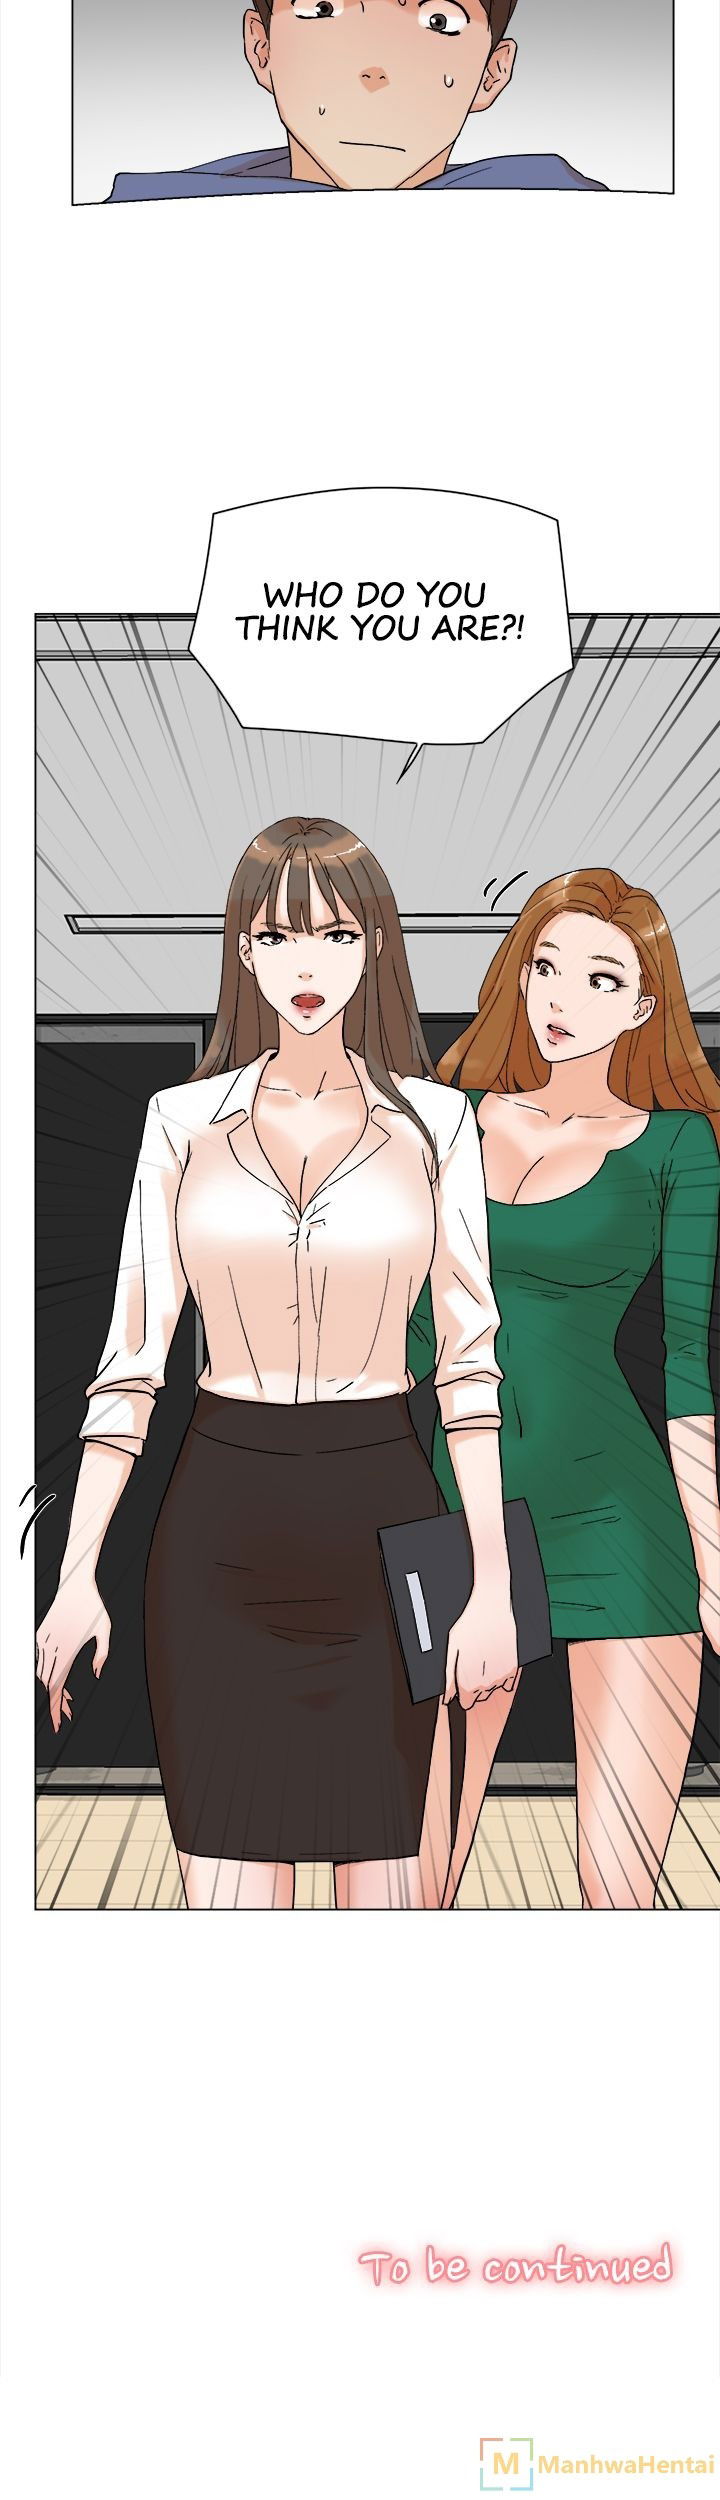 office-affairs-chap-3-19